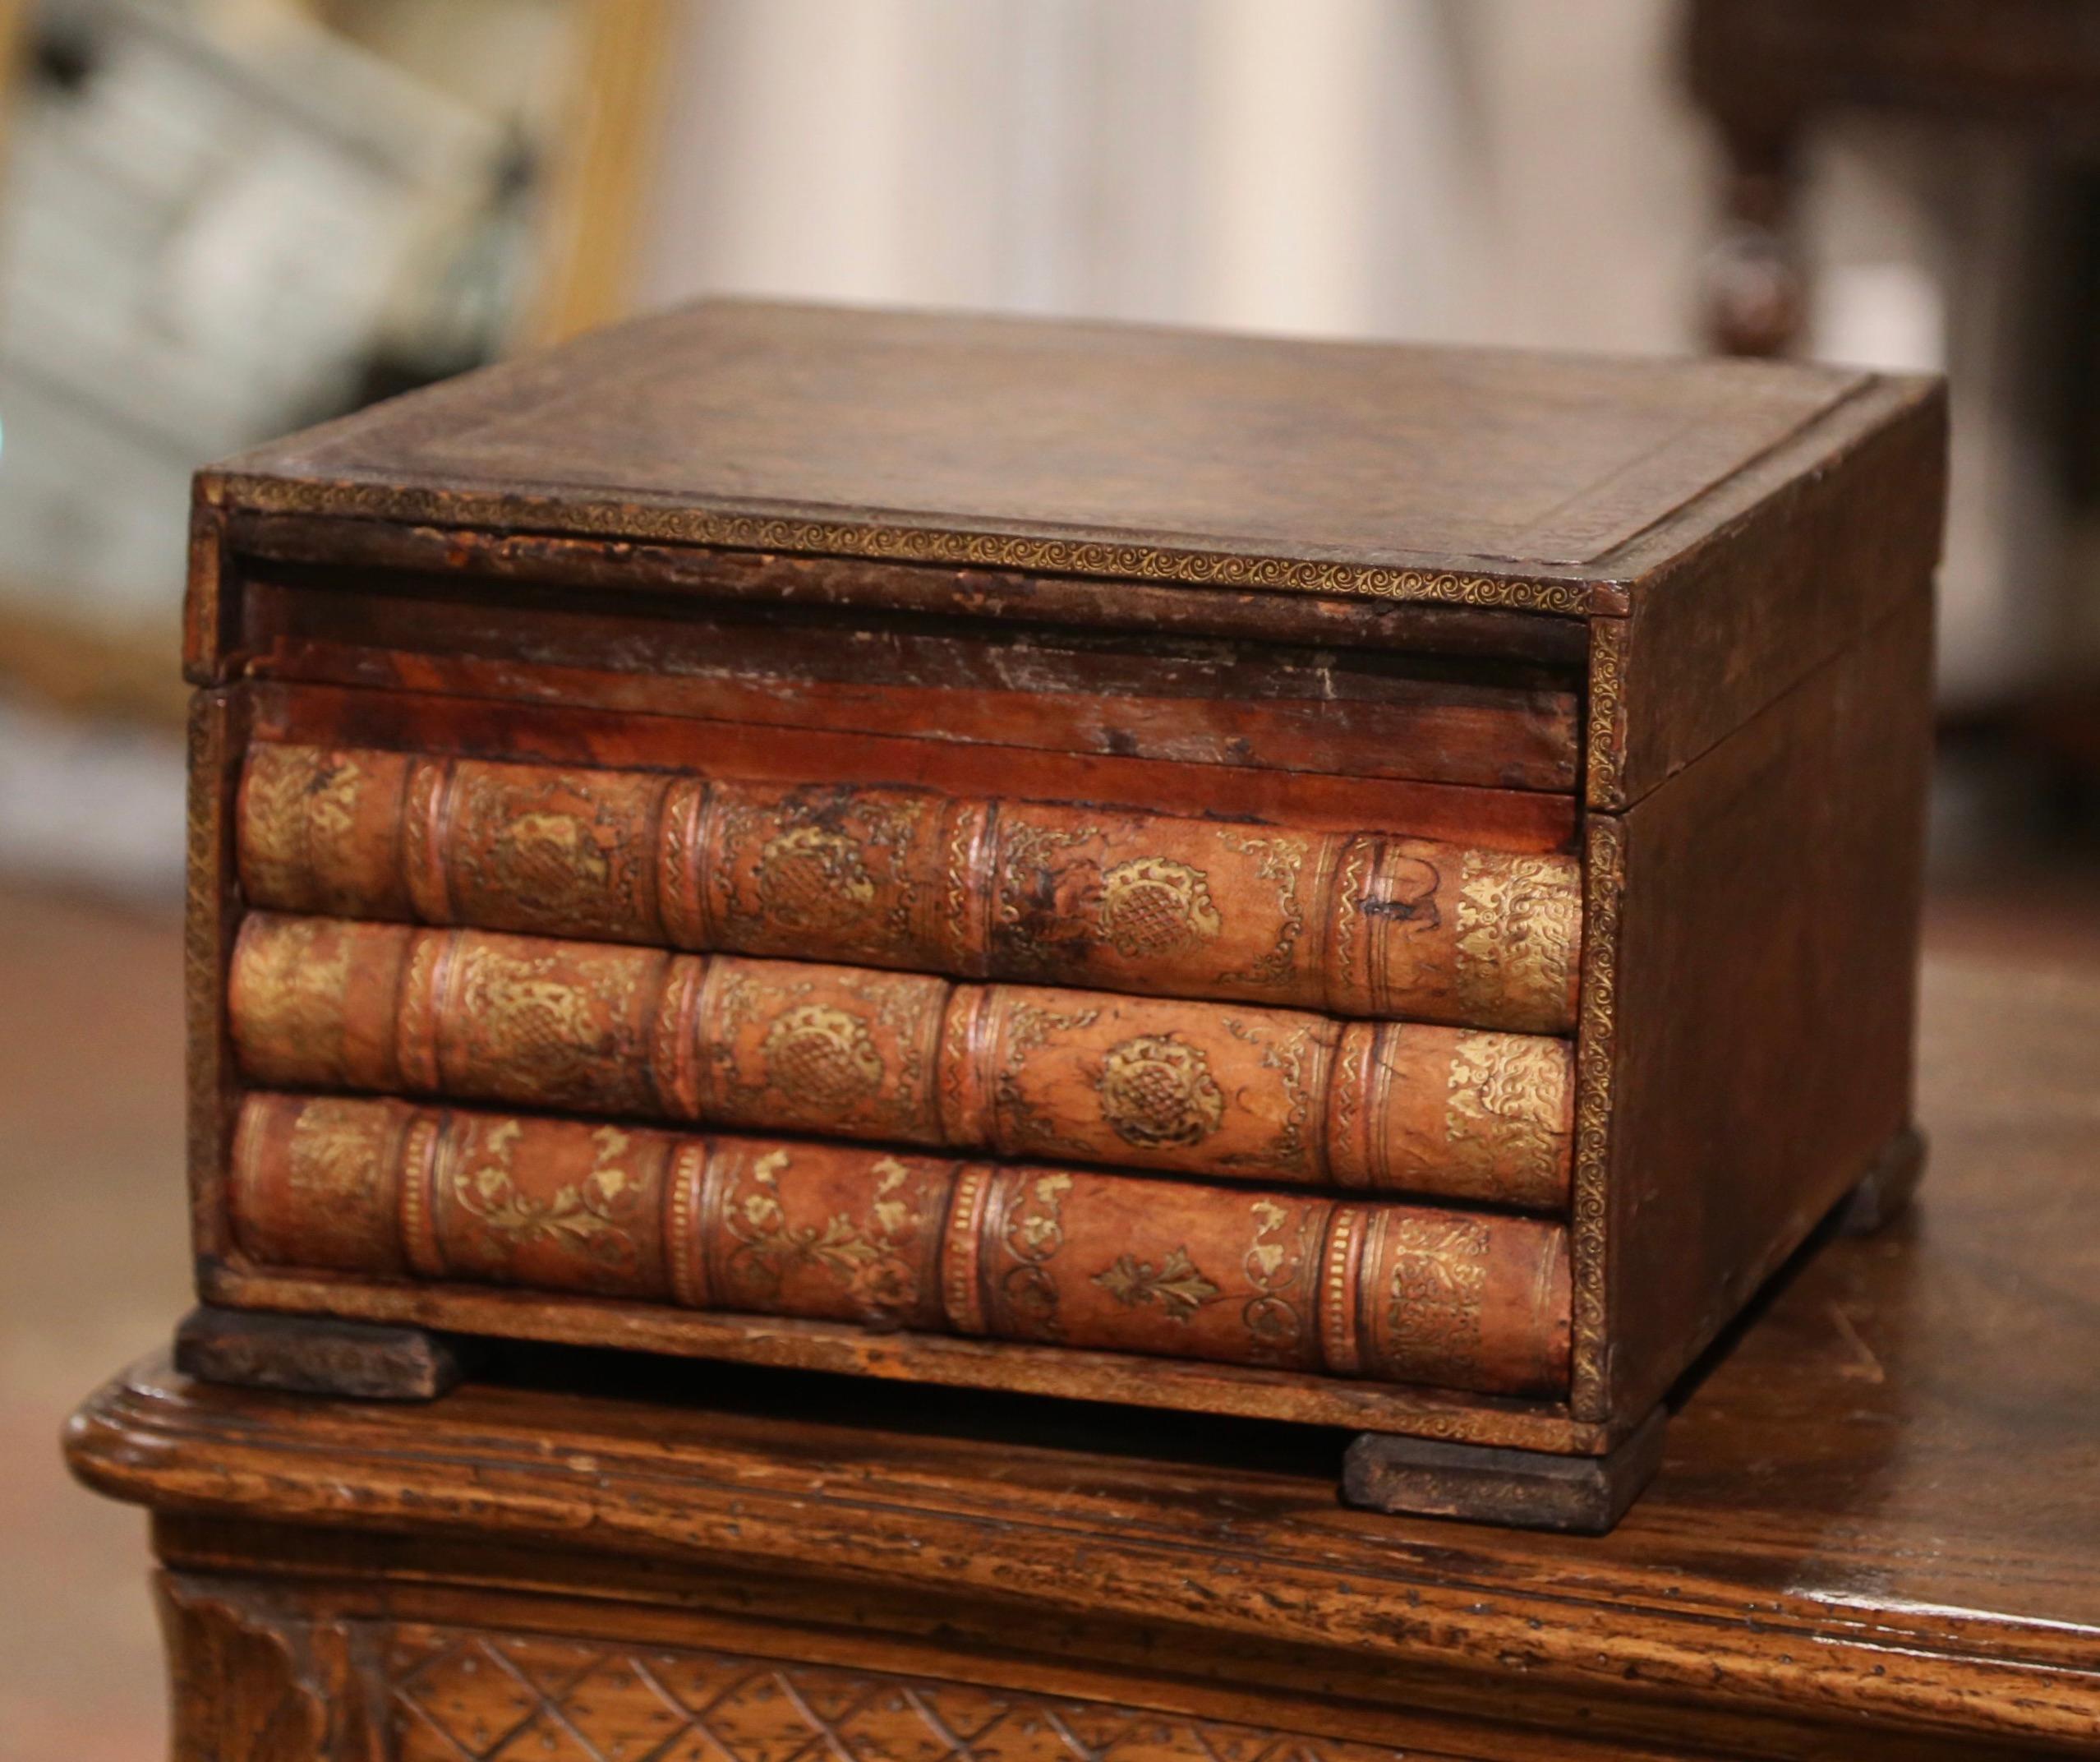 Store your TV remote controls or other valuables in this decorative leather box. Created in France circa 1880, the box is shaped as three antique leather bound books stacked together, with the lower book functioning as a hidden drawer. The box